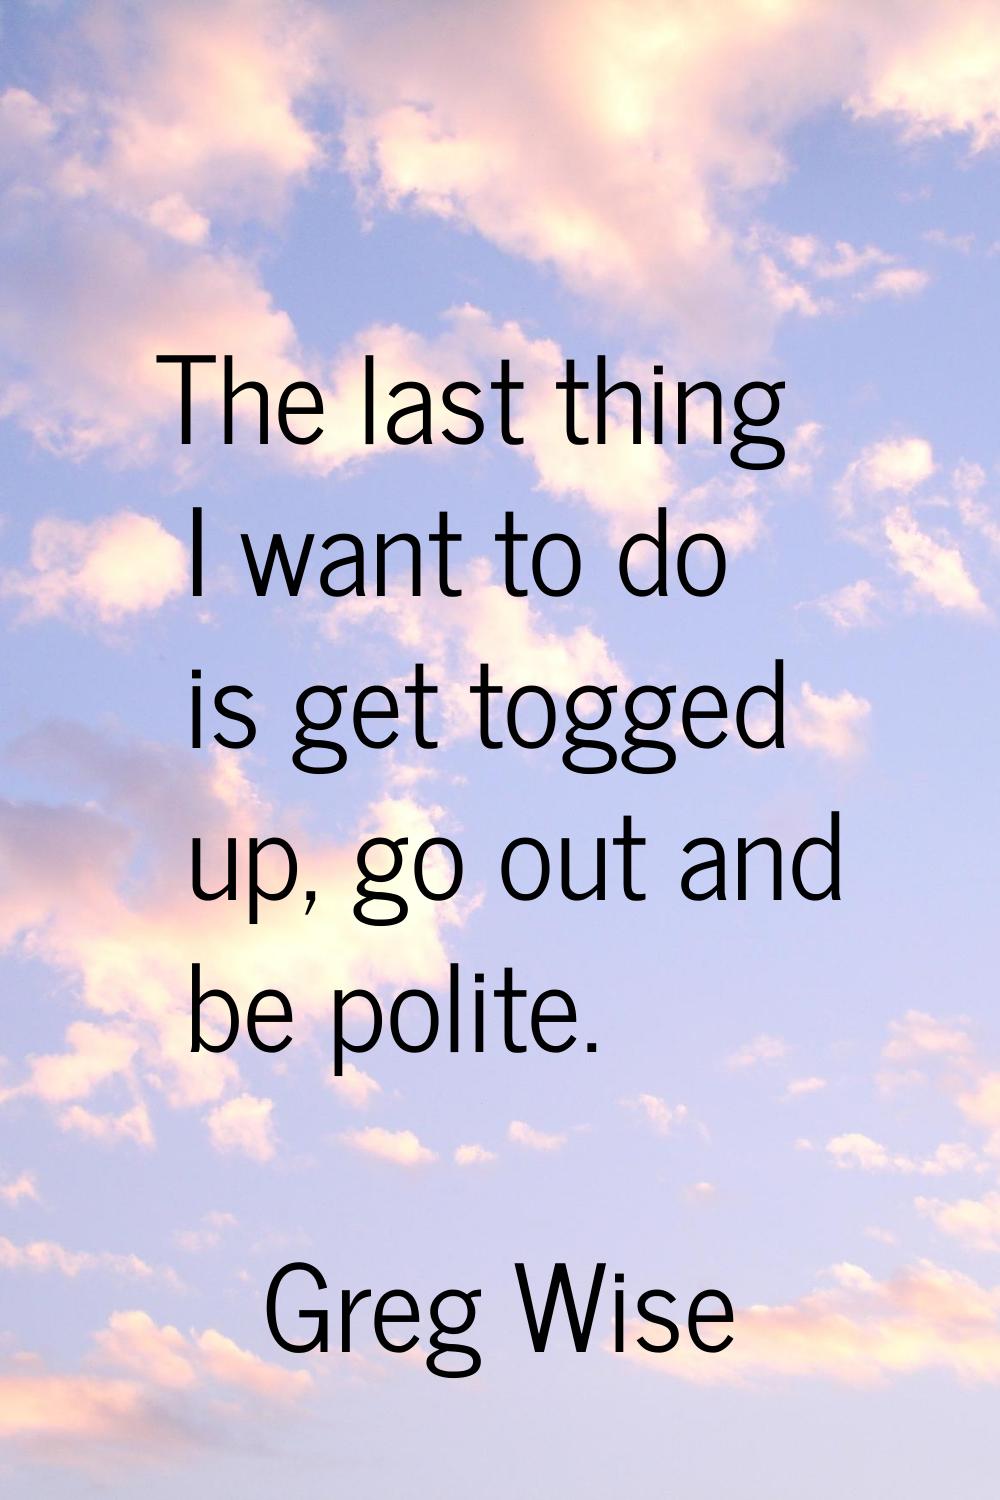 The last thing I want to do is get togged up, go out and be polite.